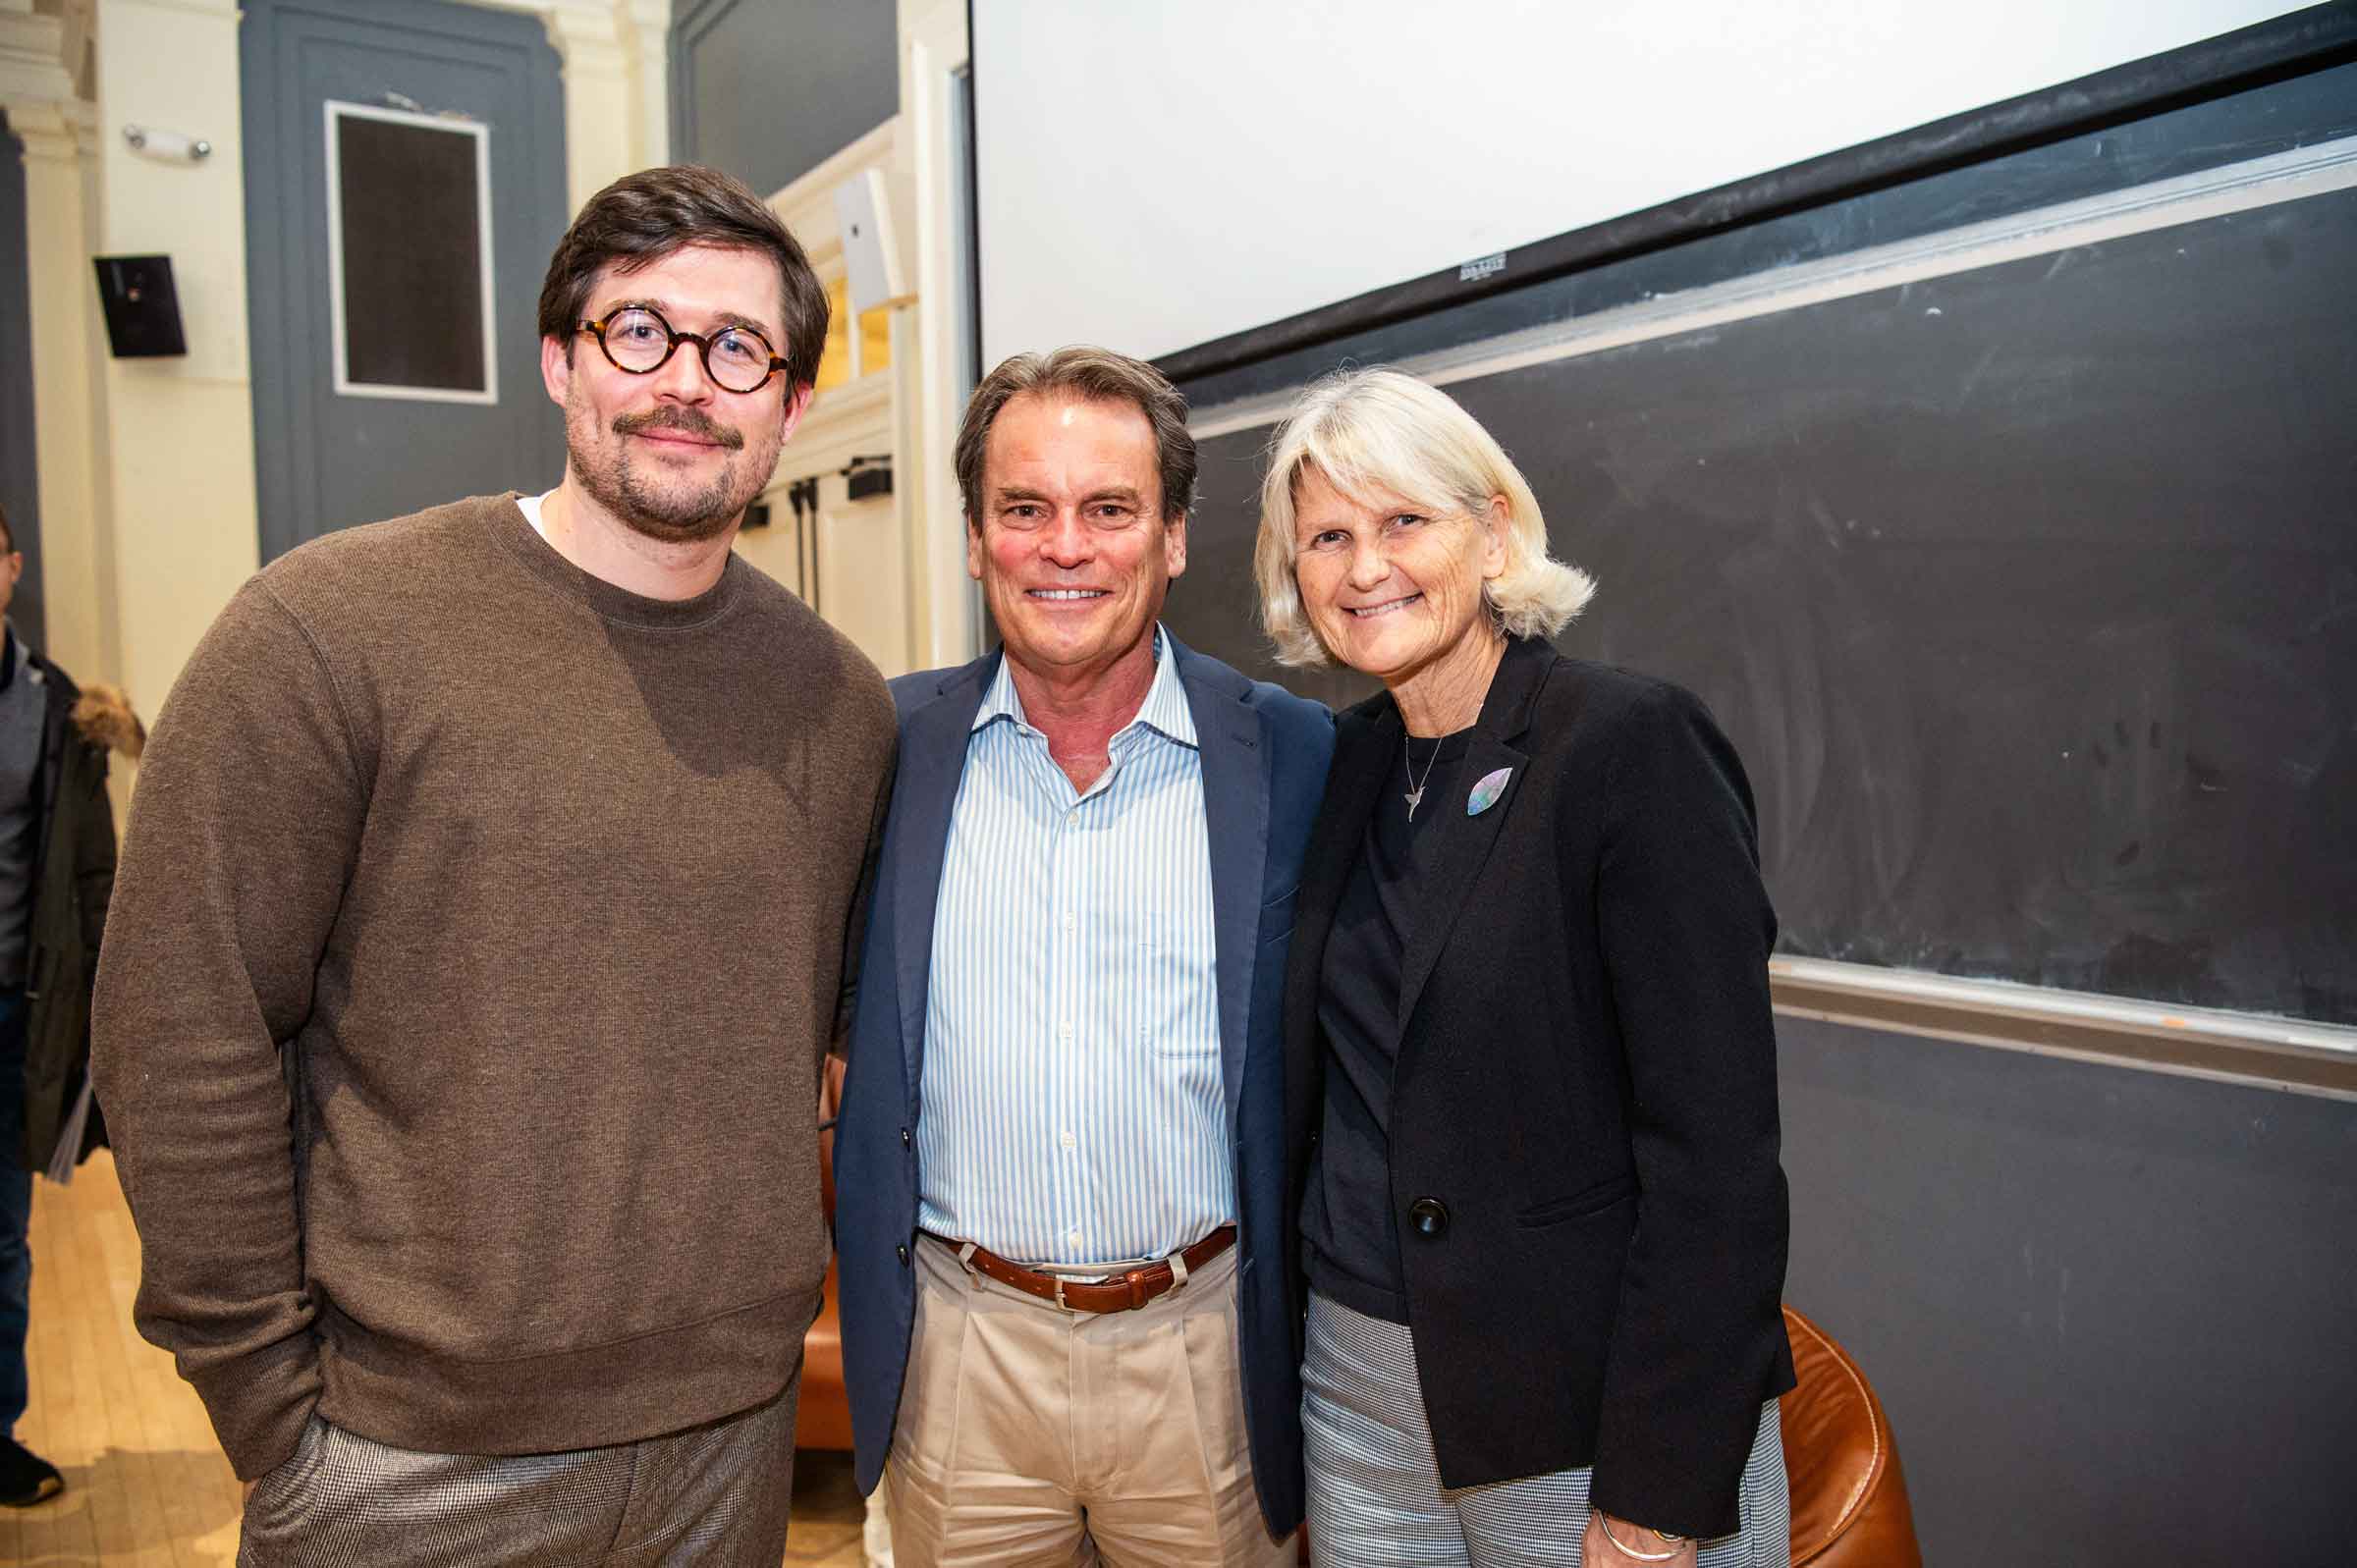 Three smiling people arm in arm standing in front of a chalkboard.